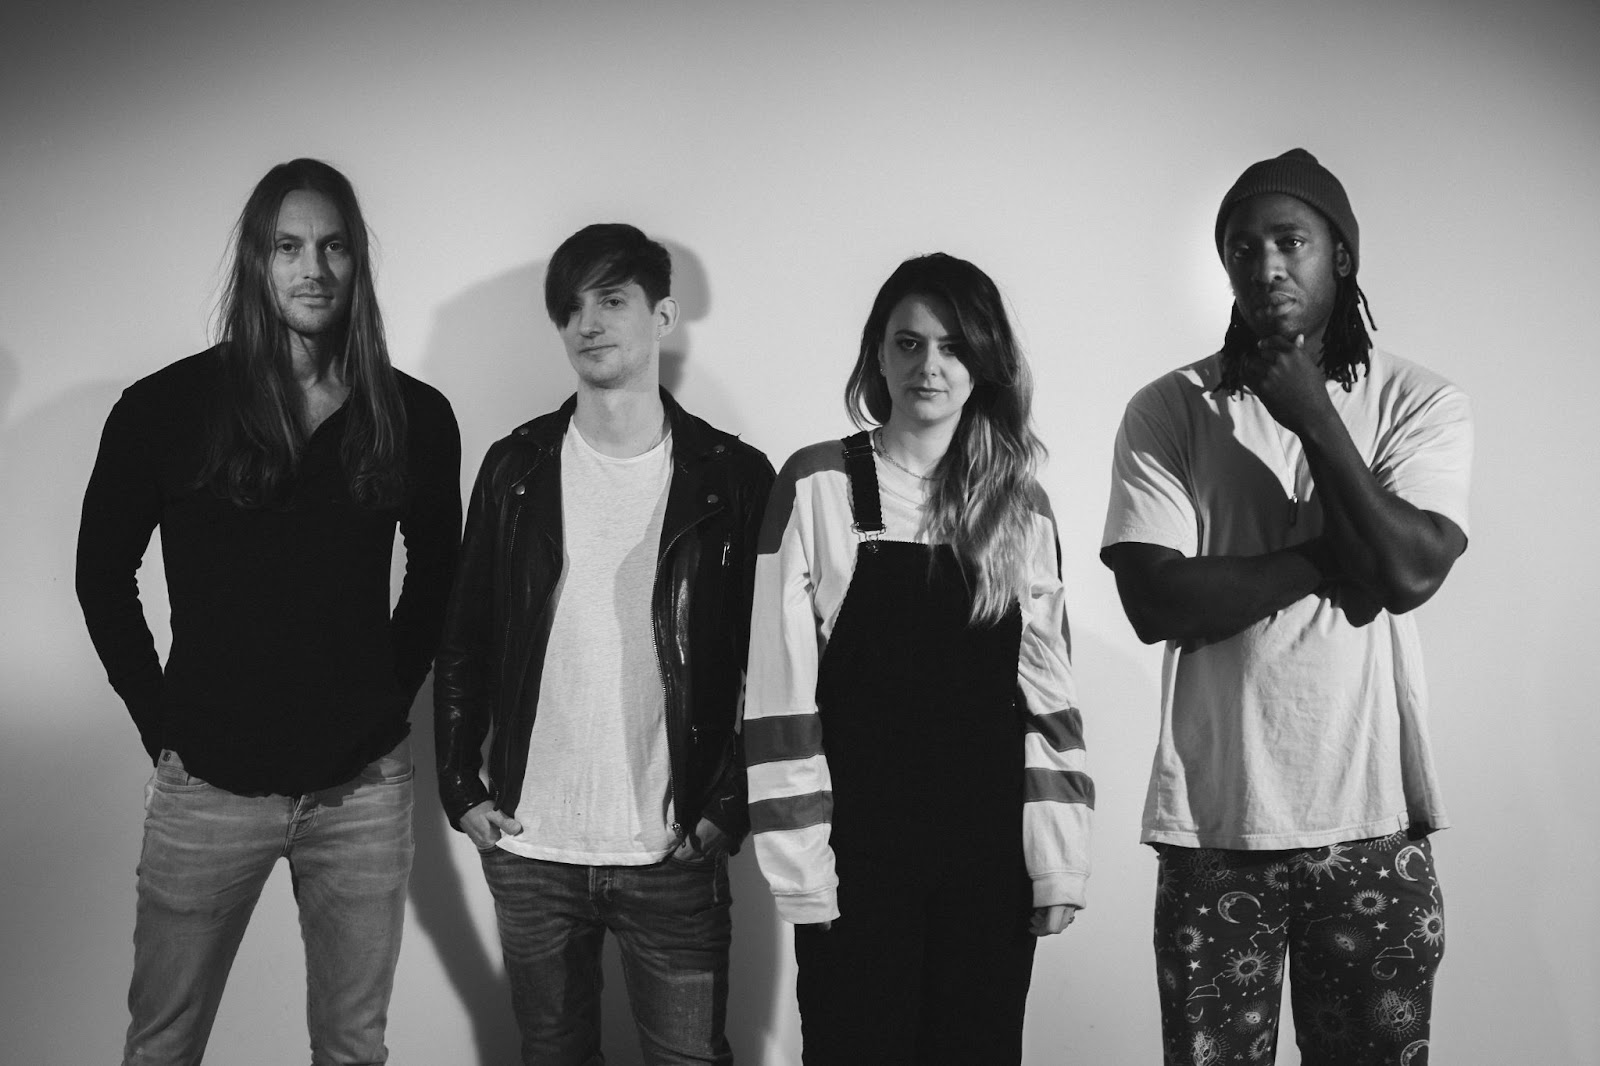 NEWS: Bloc Party return with new single ‘Traps’ and share UK tour dates